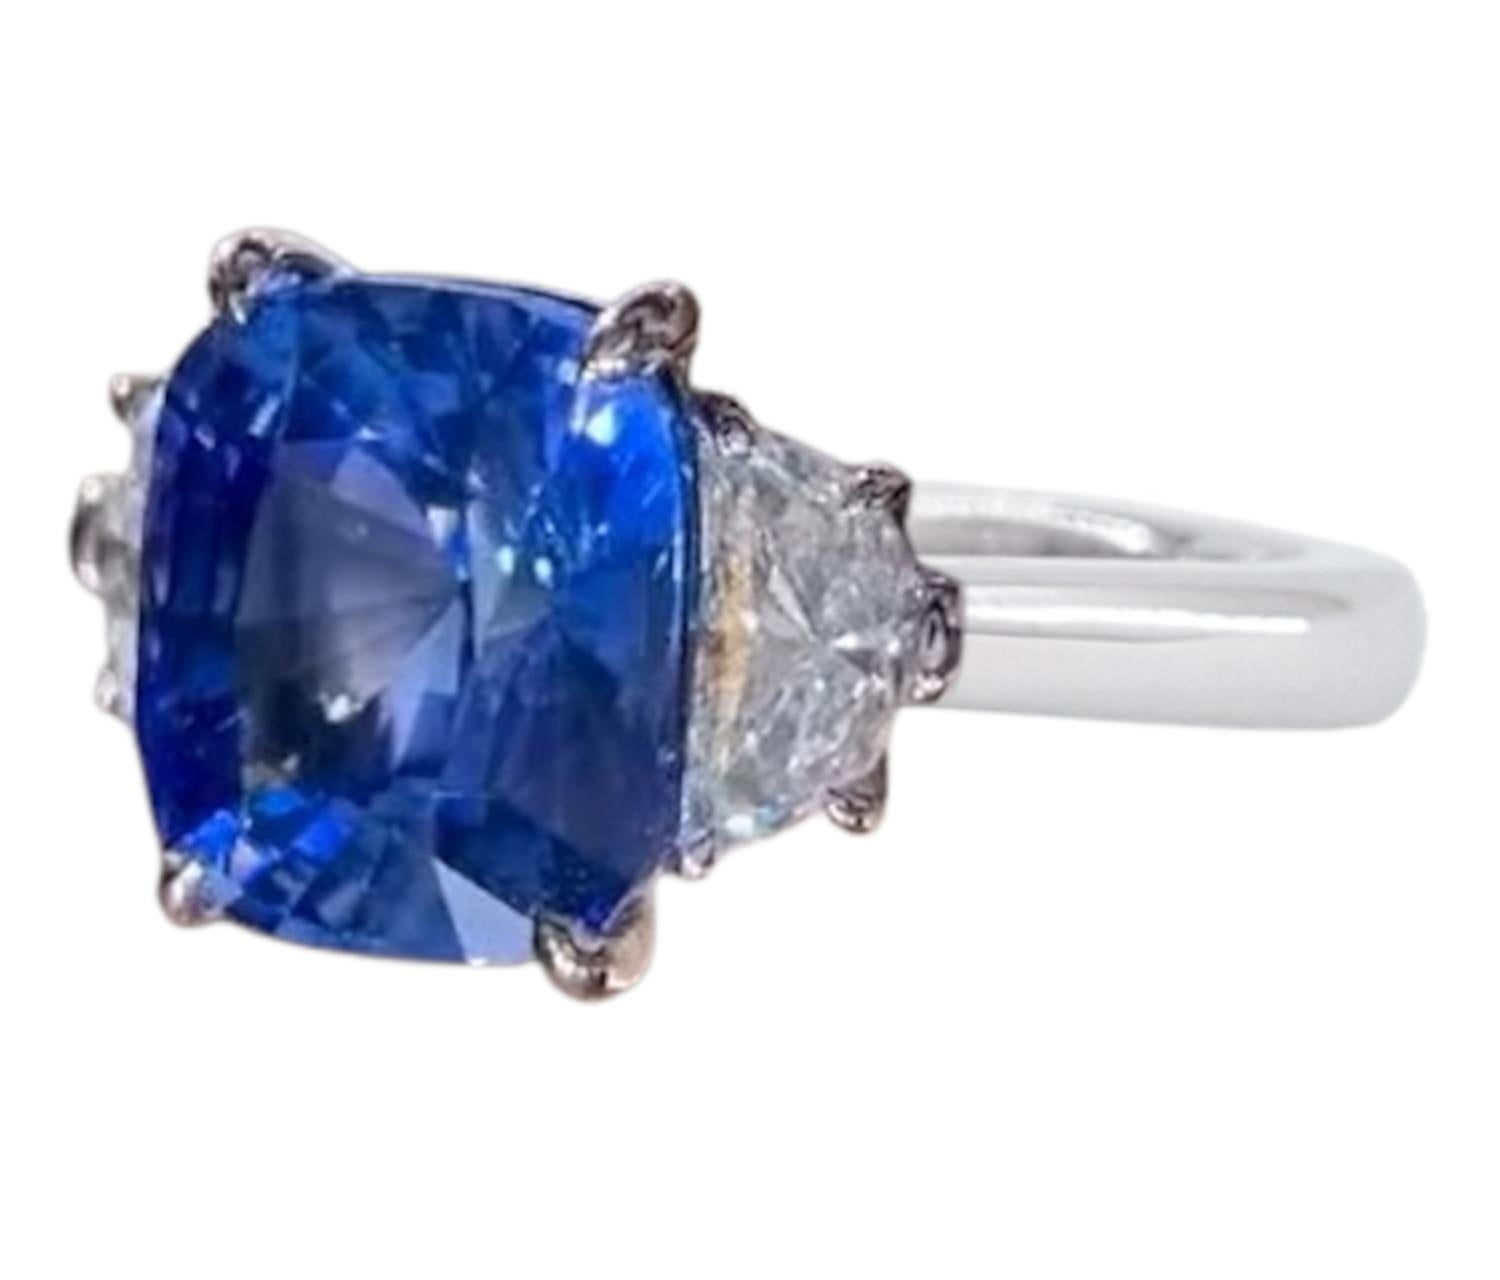  gorgeous and substantial 5.28 GII certified sapphire has vibrant blue color and a stunning play of light! It is a brightly saturated and perfectly even classic Ceylon blue color that GII classified simply as Blue. 